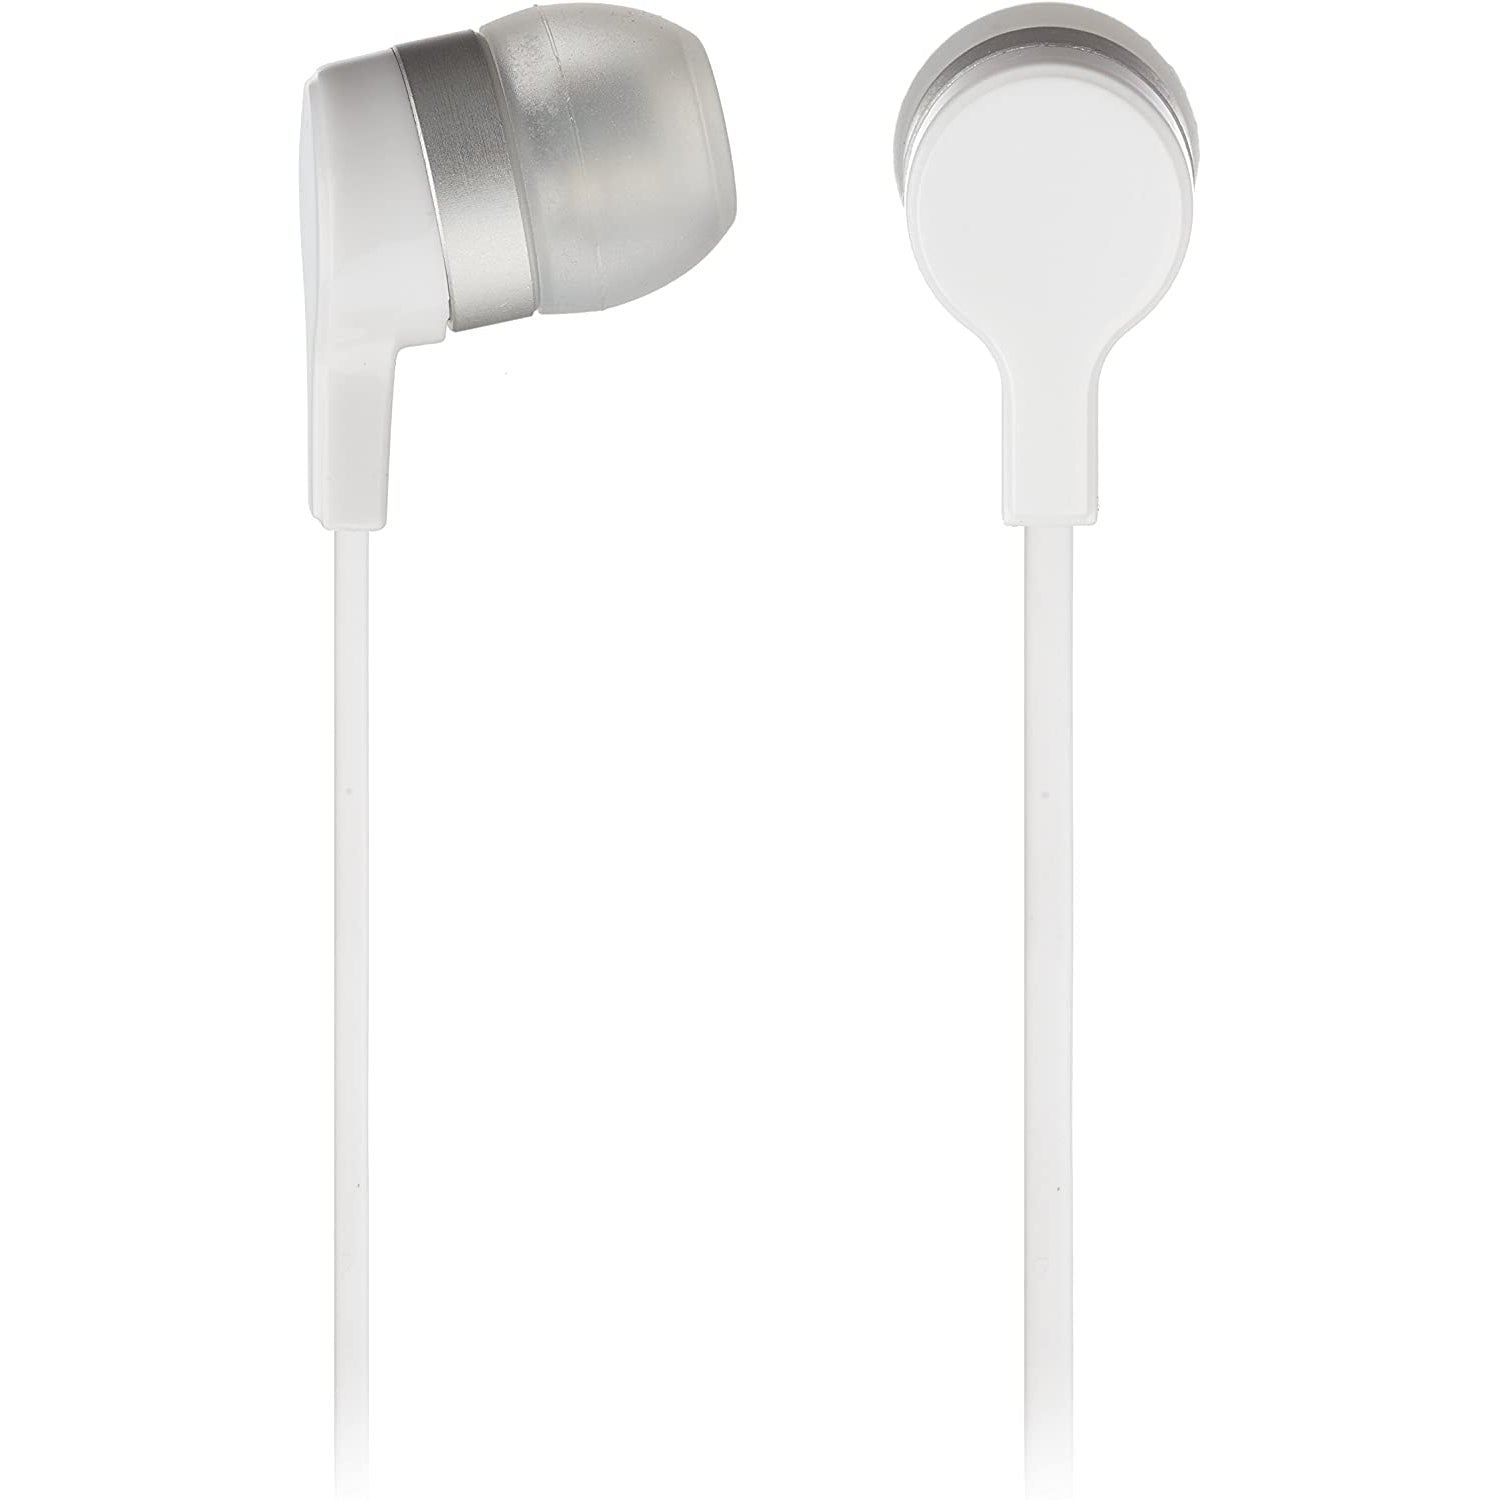 KitSound Mini In-Ear Headphones with In-Line Mic - White - Refurbished Excellent